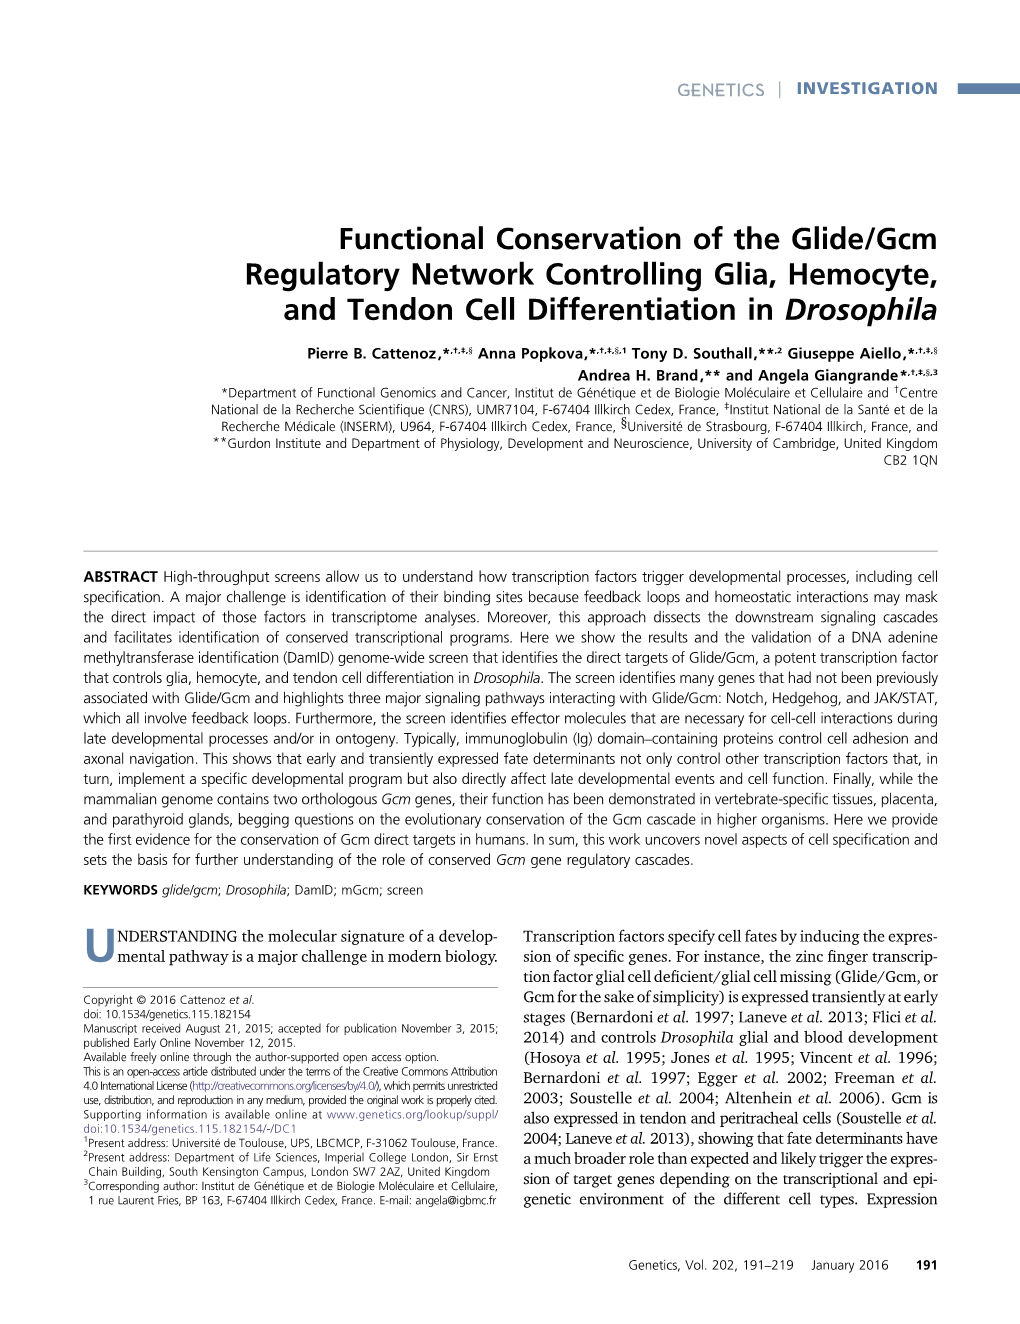 Functional Conservation of the Glide/Gcm Regulatory Network Controlling Glia, Hemocyte, and Tendon Cell Differentiation in Drosophila